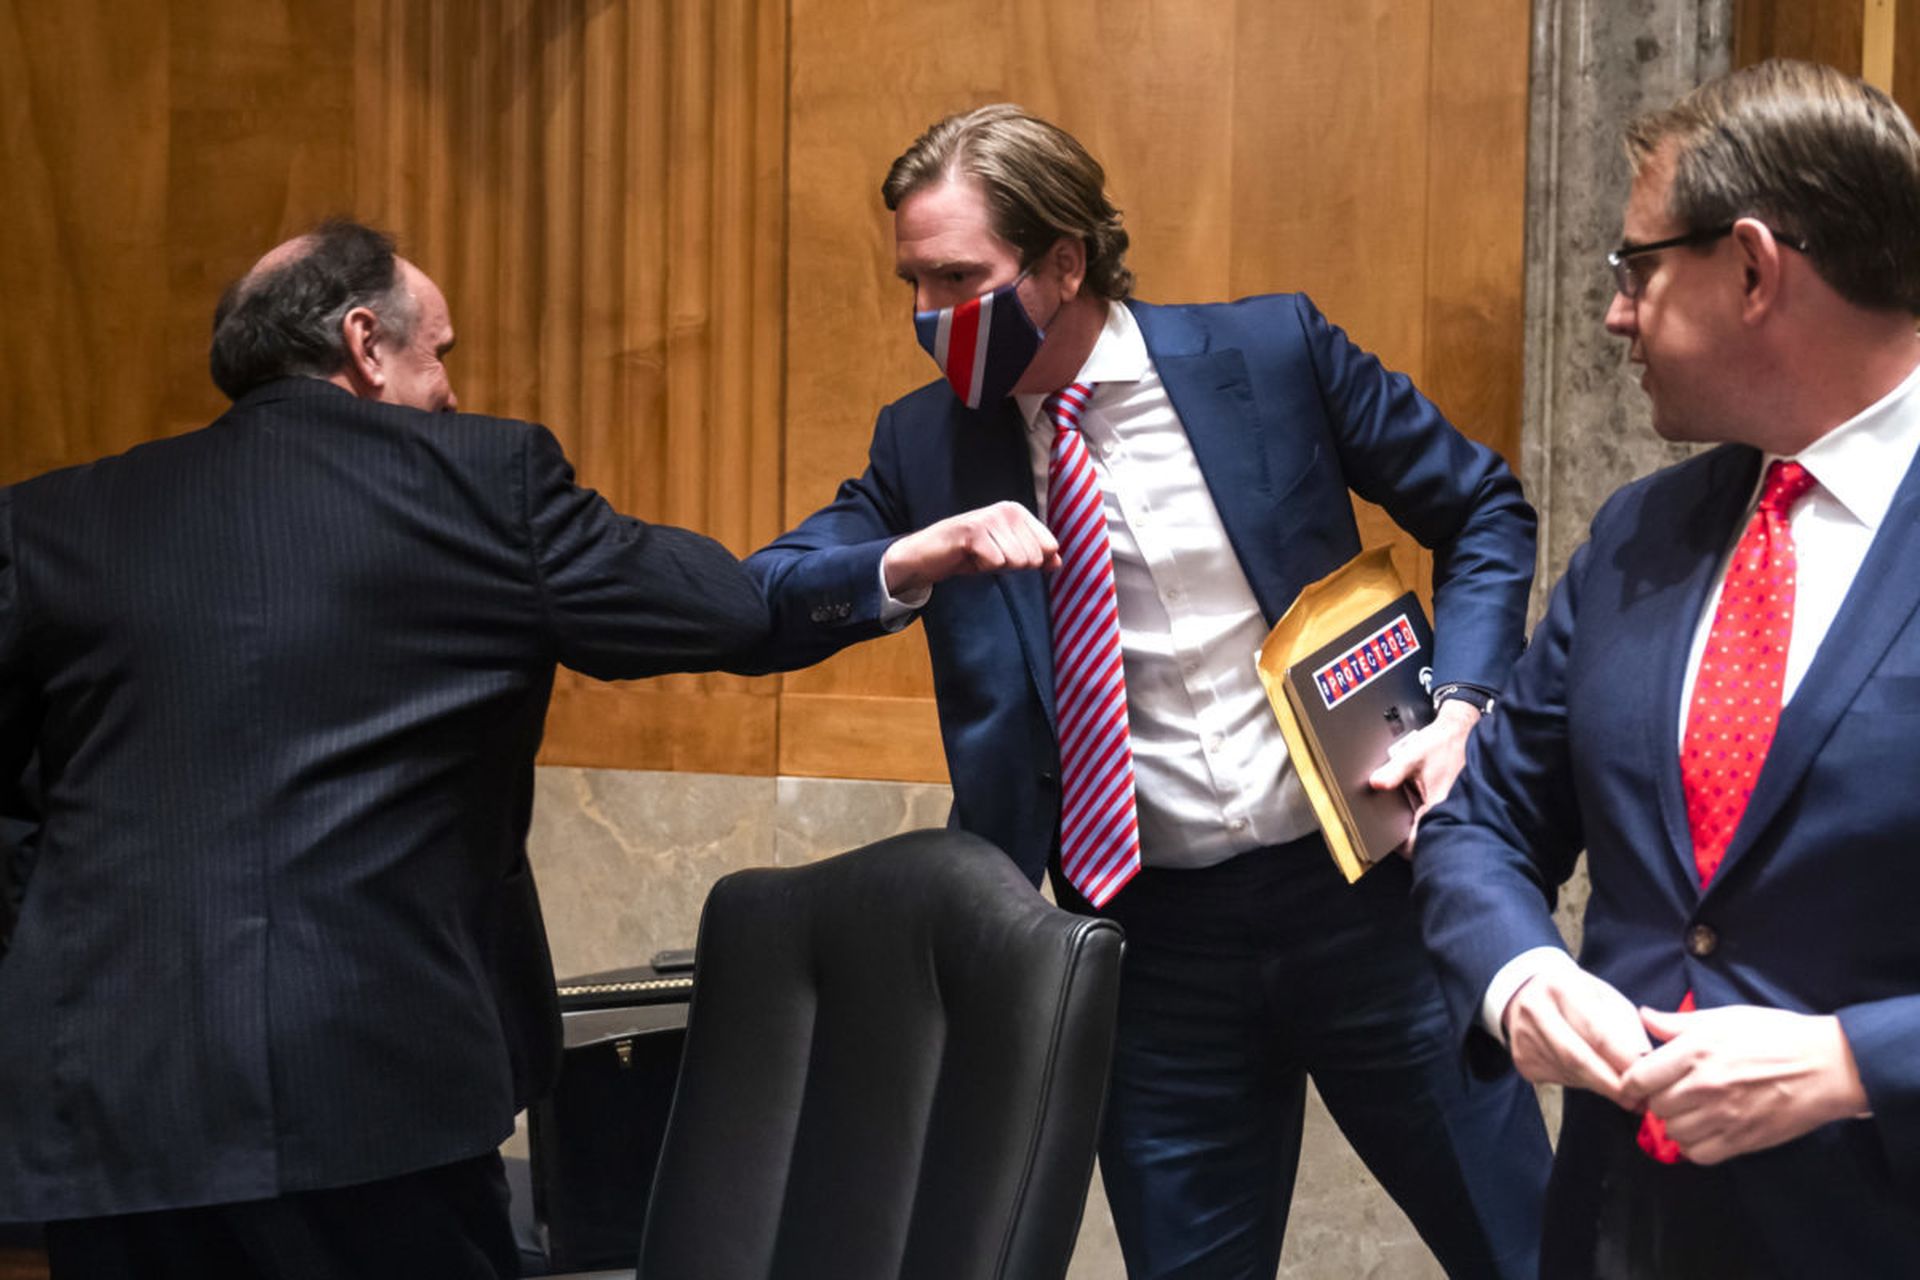 Former Cybersecurity and Infrastructure Security Agency Director Chris Krebs elbow bumps Trump campaign attorney James Troupis (L), while Trump campaign attorney Jesse Binnall (R) looks on following a Senate Homeland Security and Governmental Affairs hearing. Krebs said he supports Congress passing enhanced insider threat program requirements on f...